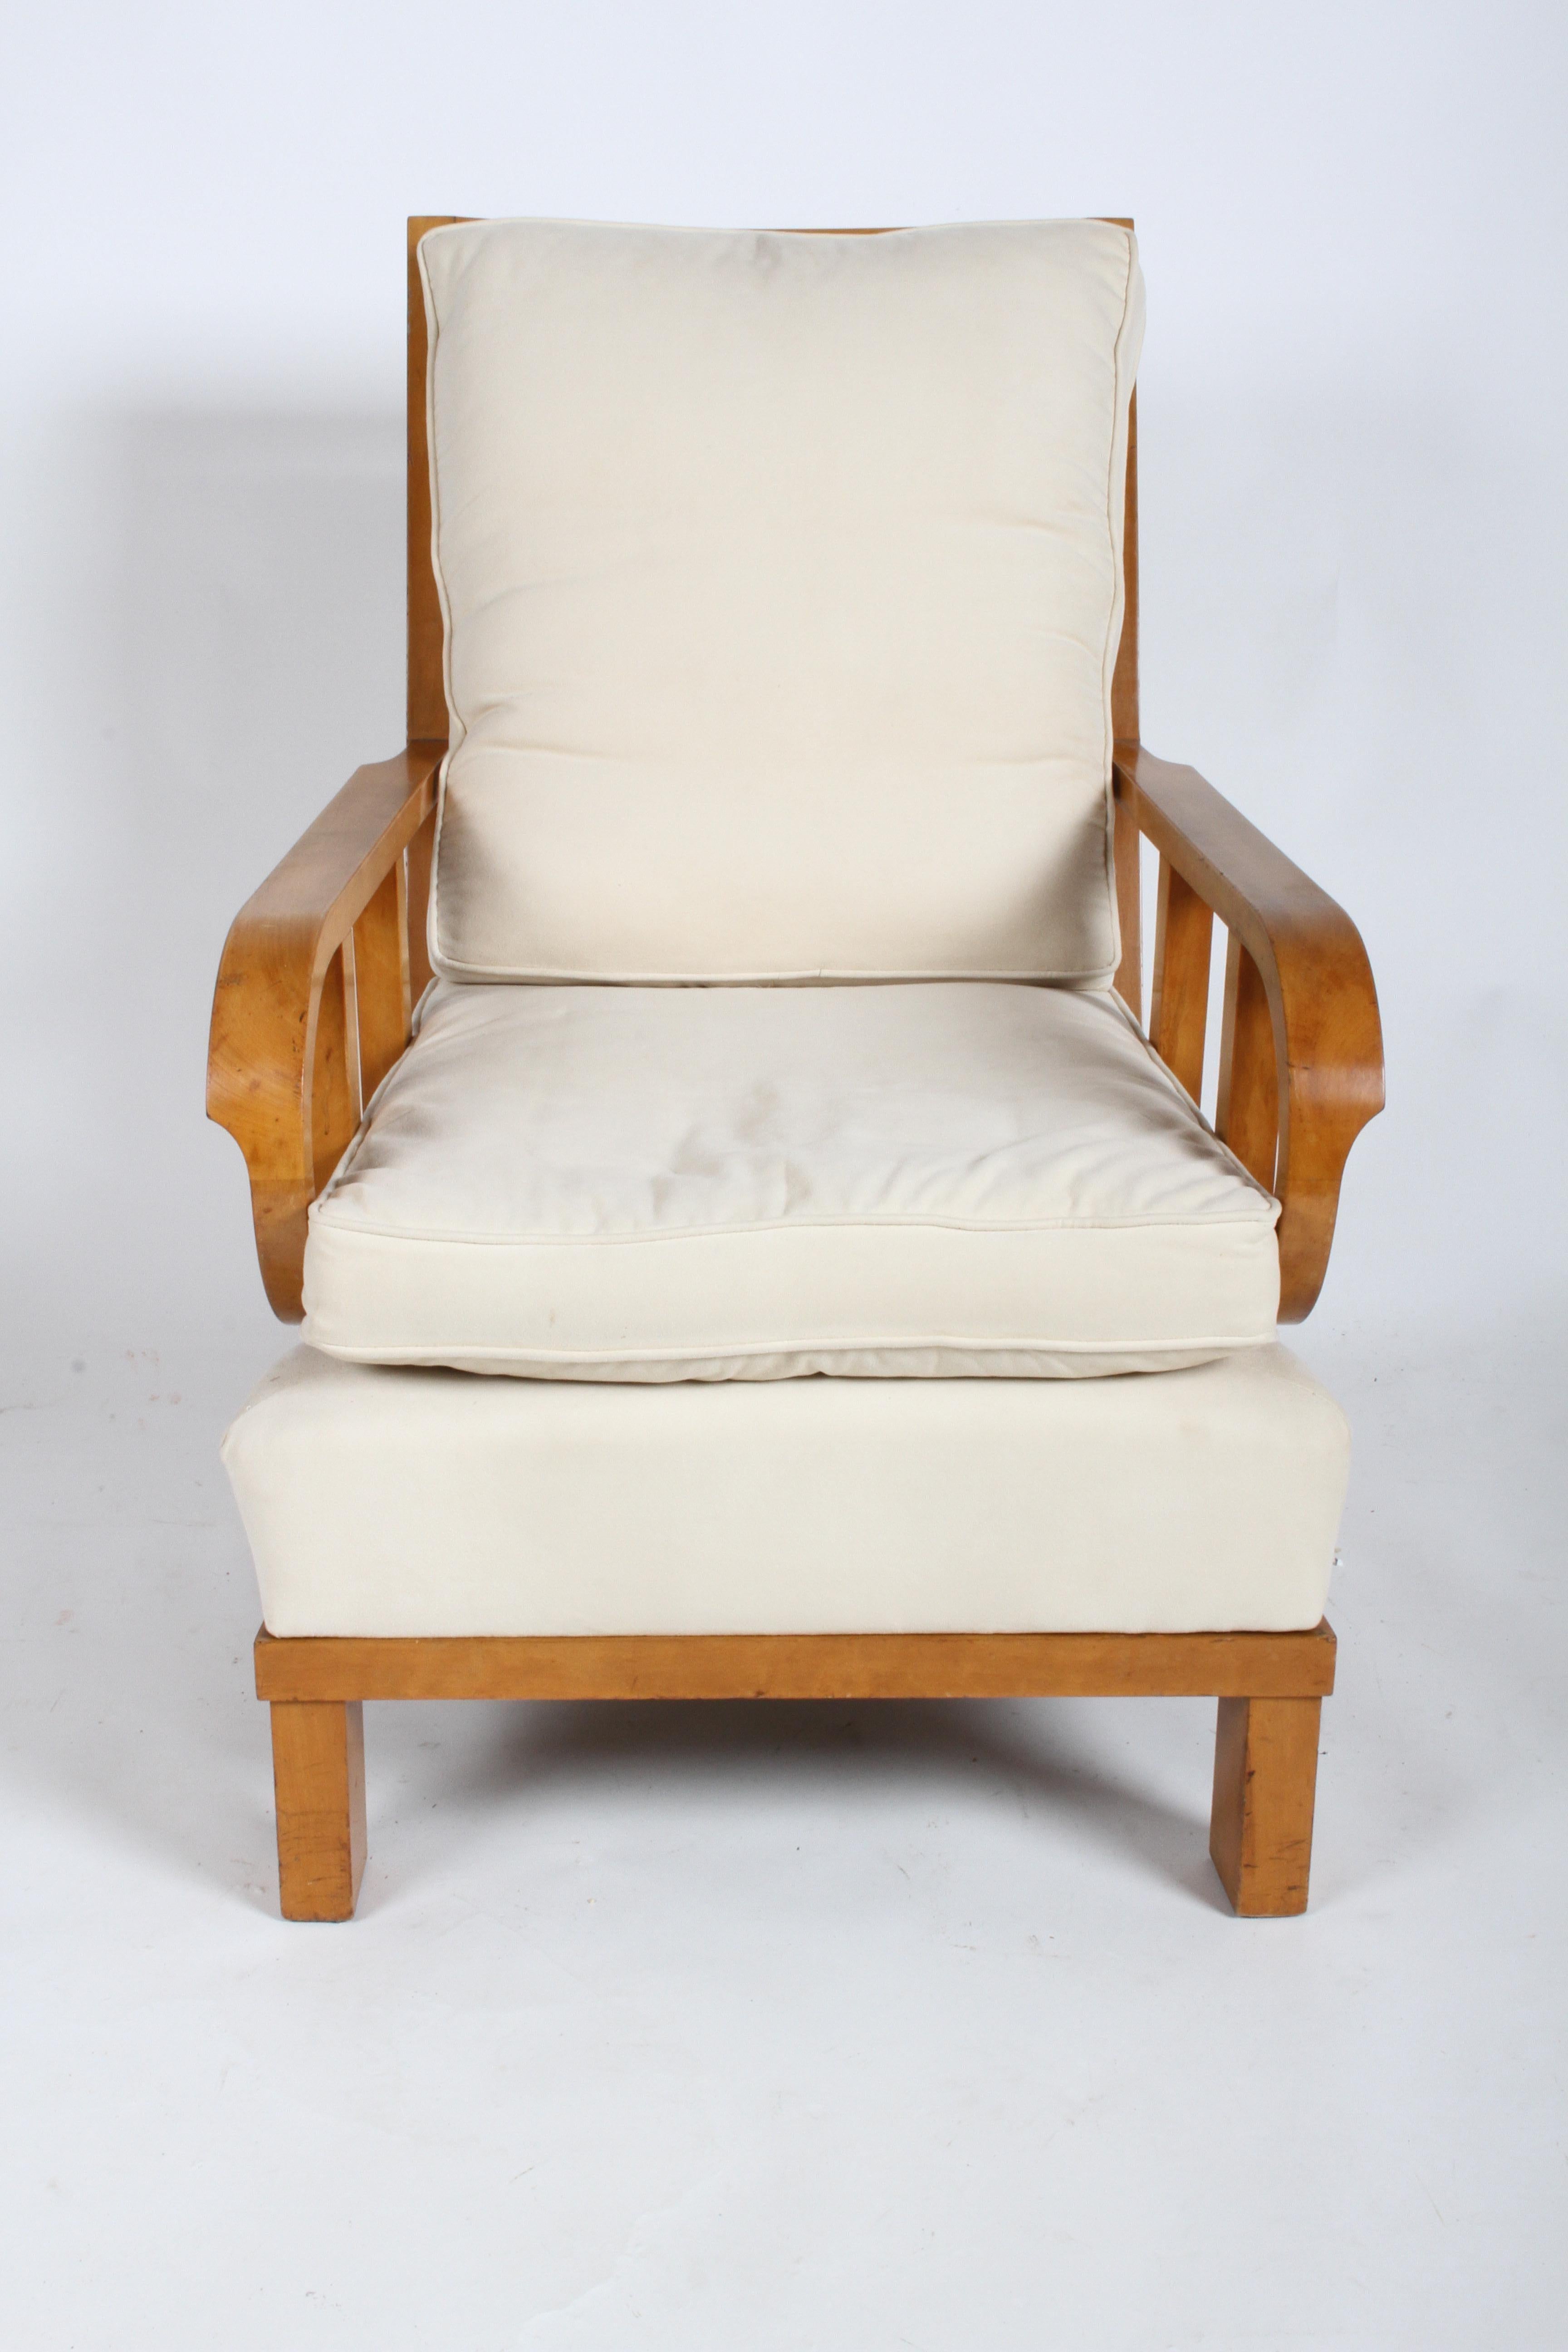 German Vienna Secession Lounge or Club chair in Beechwood and Off White Suede